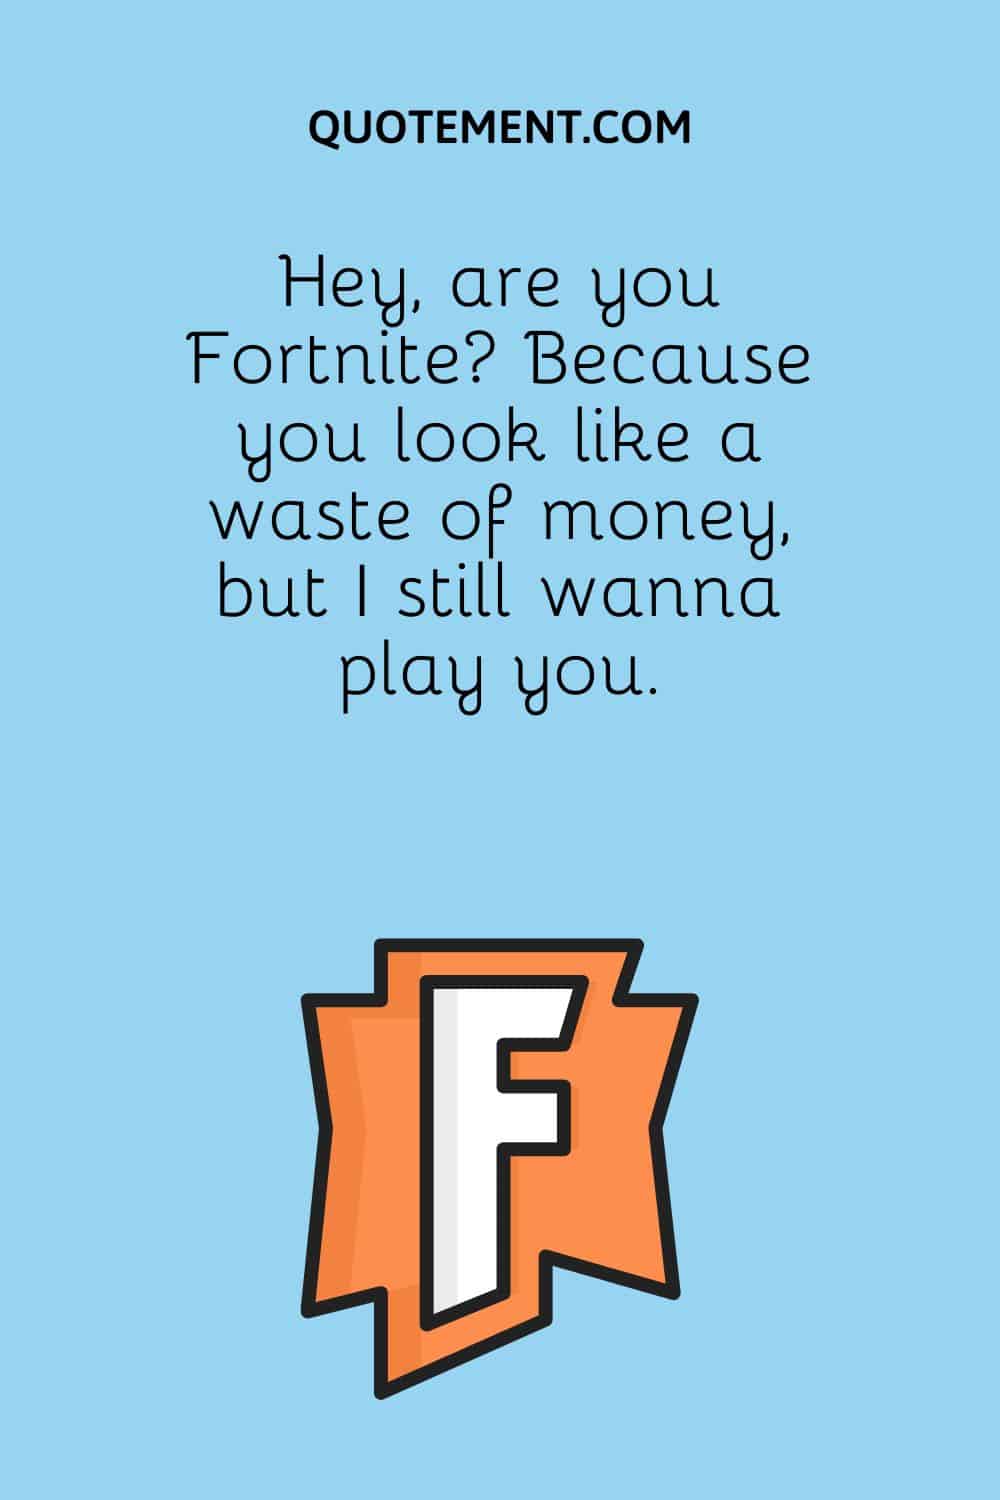 Hey, are you Fortnite